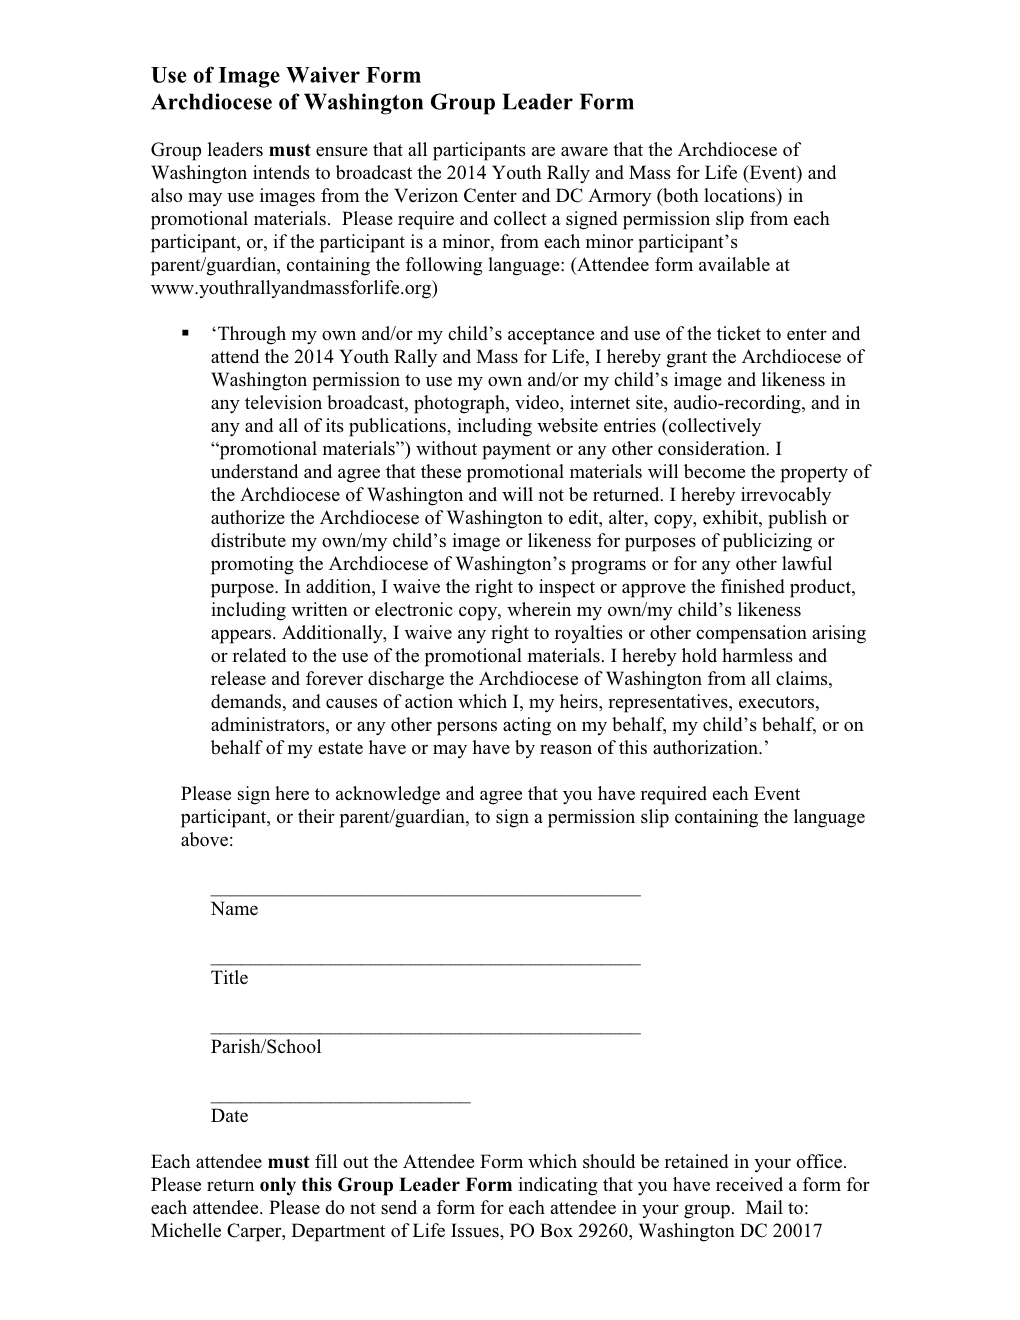 Use of Image Waiver Form